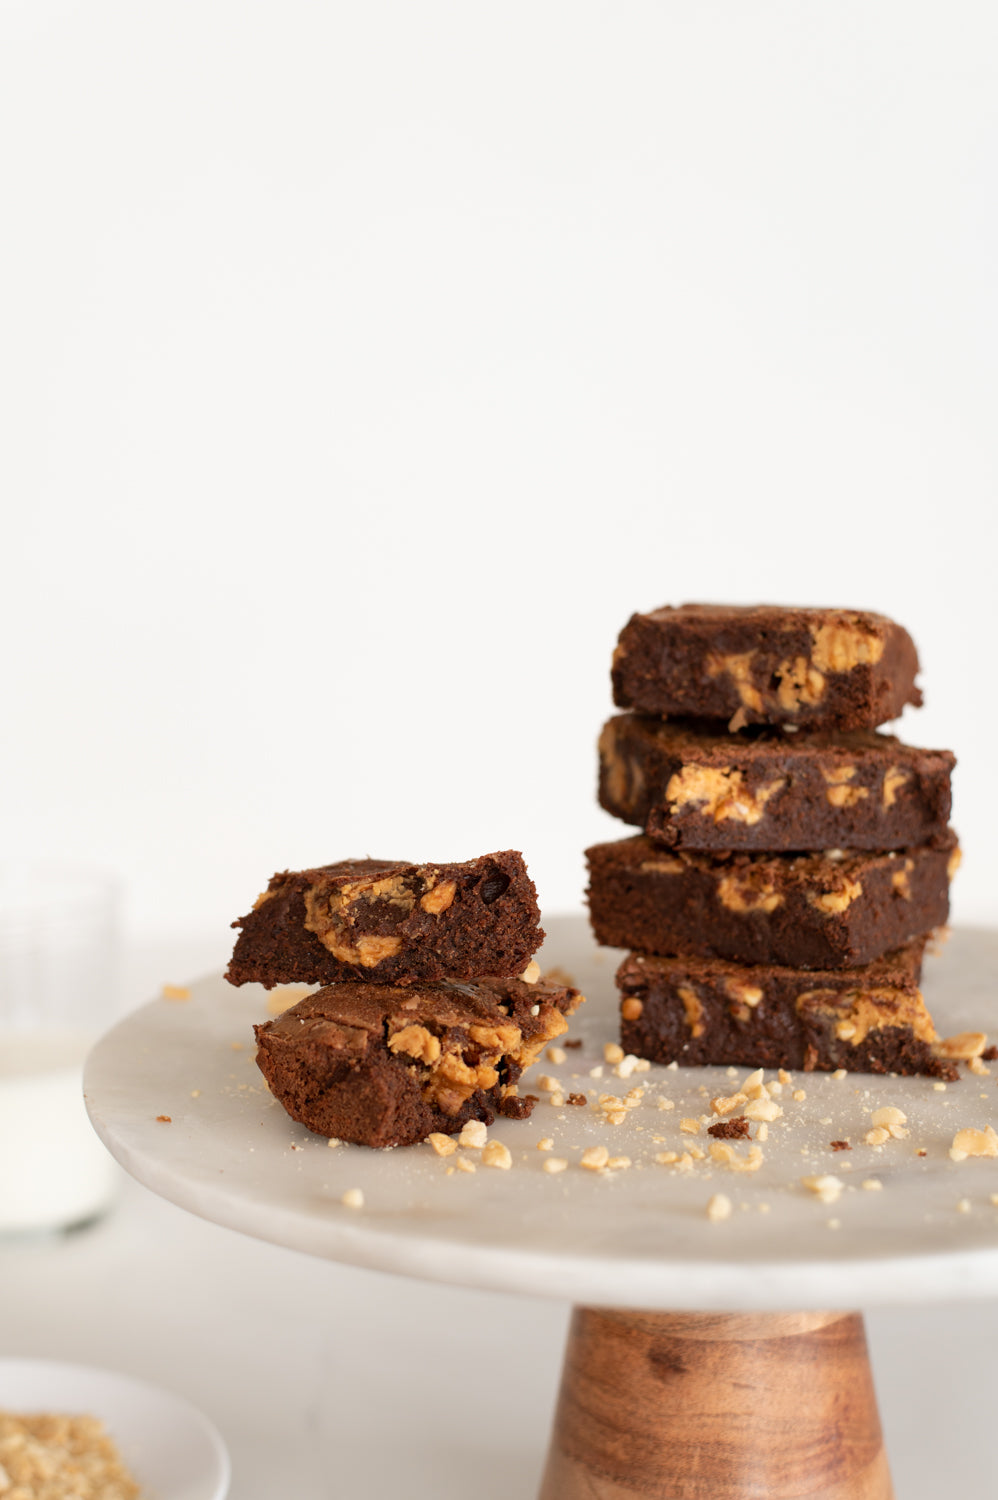 A stack of peanut butter and chocolate brownies on a cake stand